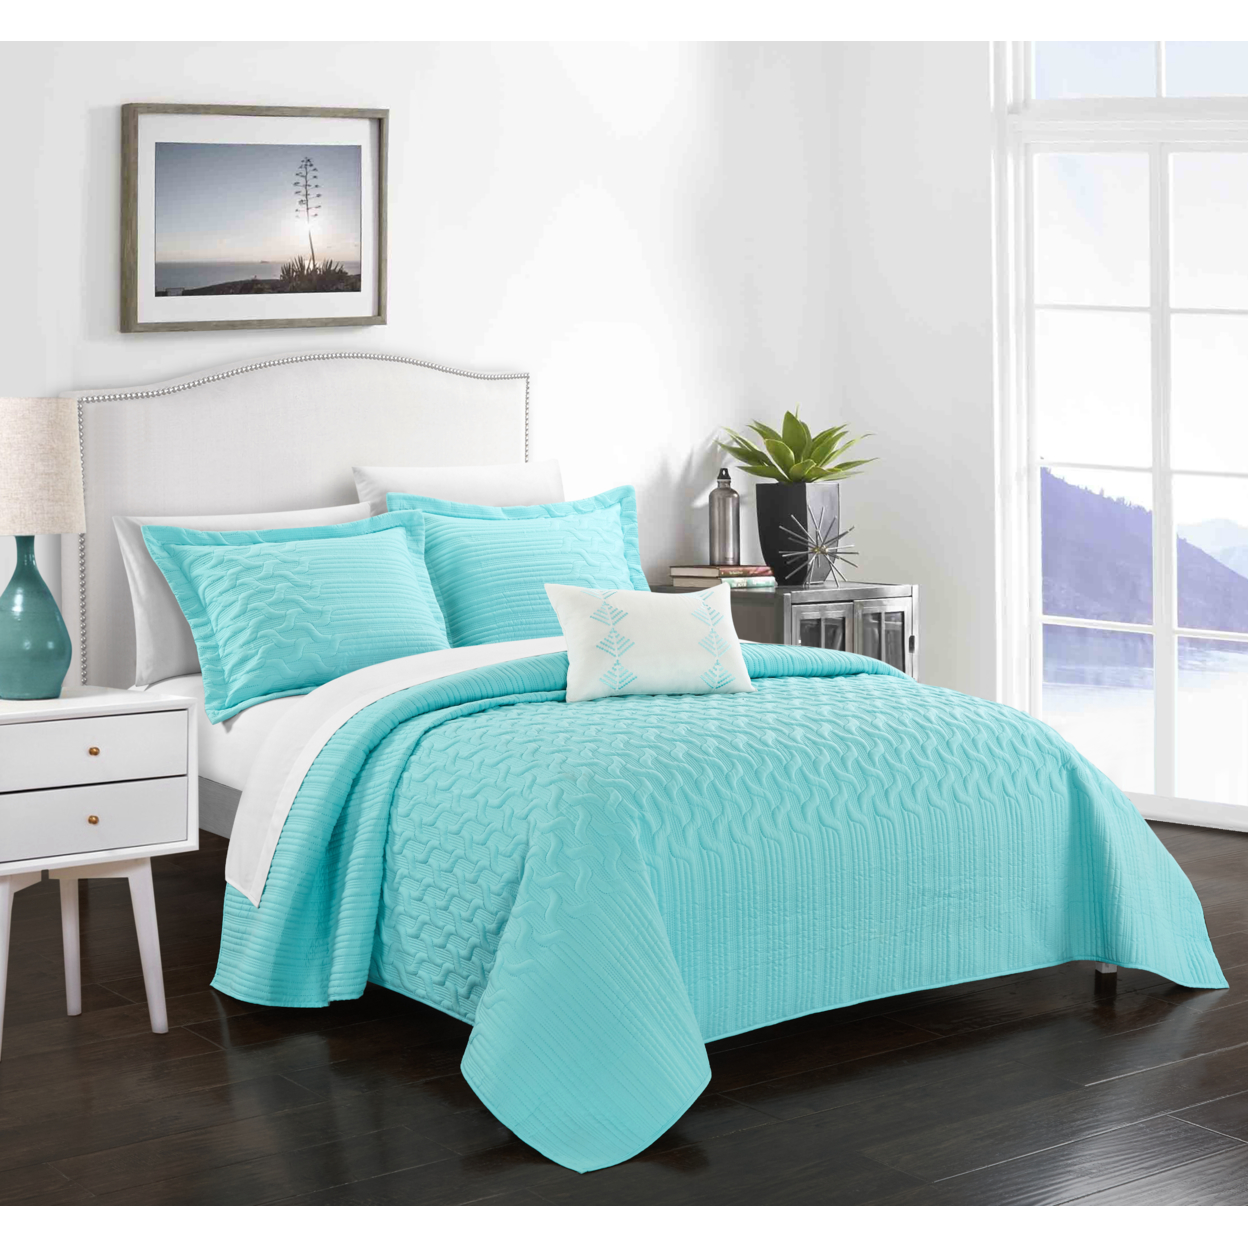 Shaliya 4 Or 3 Piece Quilt Cover Set Interlaced Vine Pattern Quilted Bed In A Bag - Aqua, King